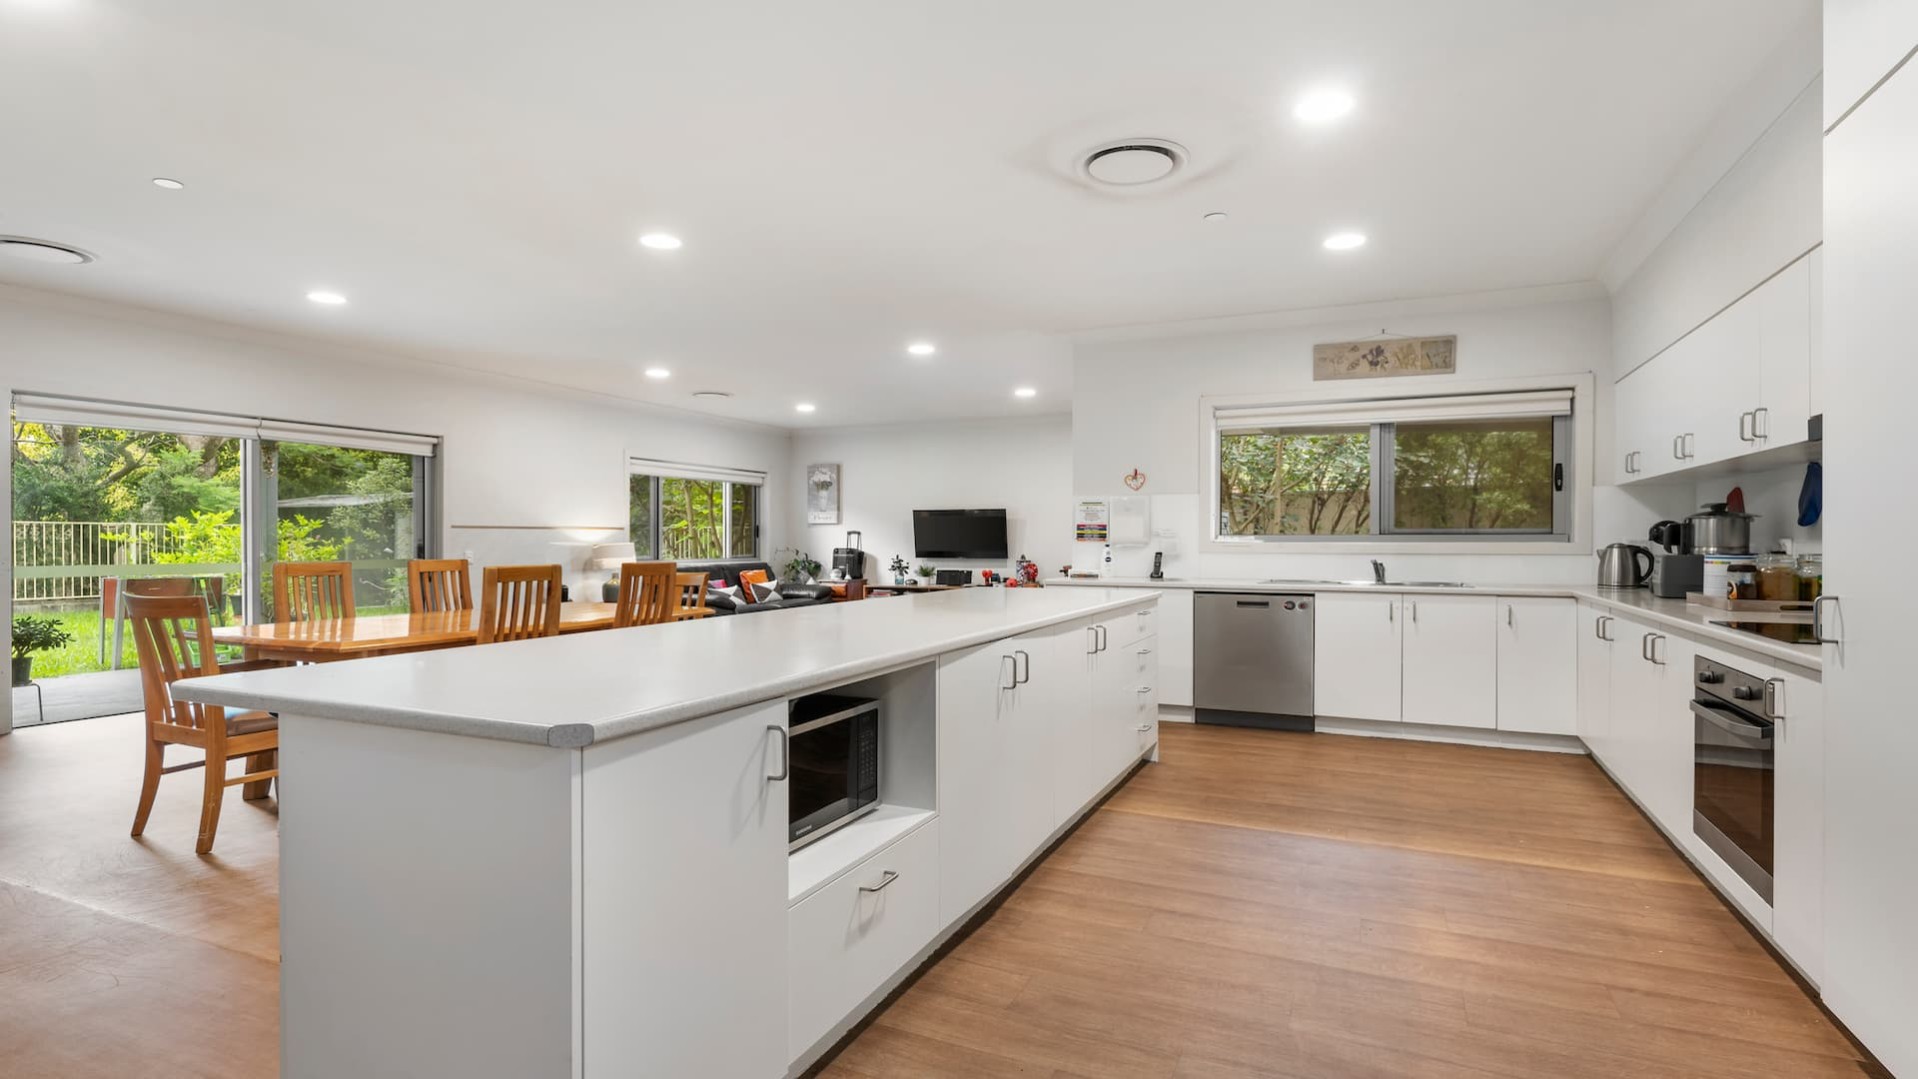 Kitchen with white benches and cabinets, structured in an L-shape with a large kitchen island.